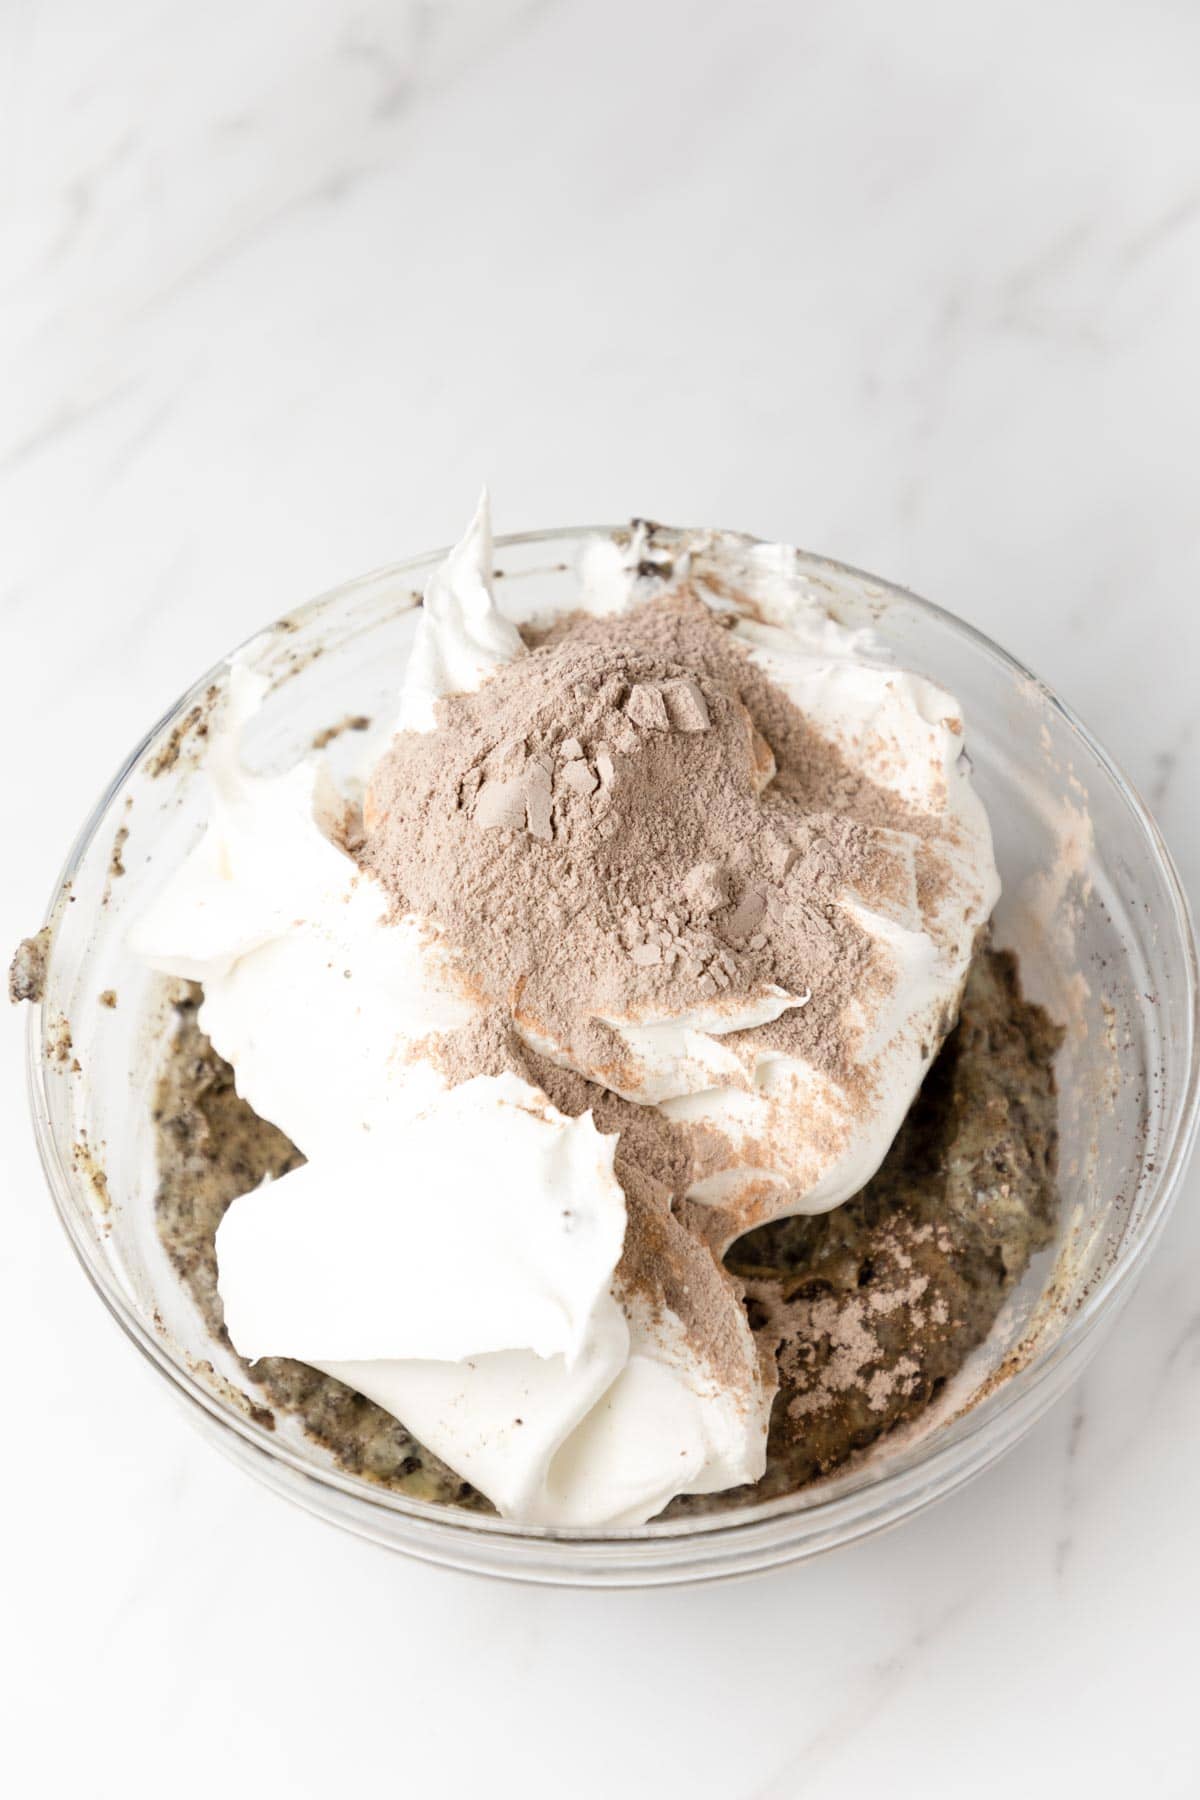 whipped topping and chocolate pudding mix in a bowl